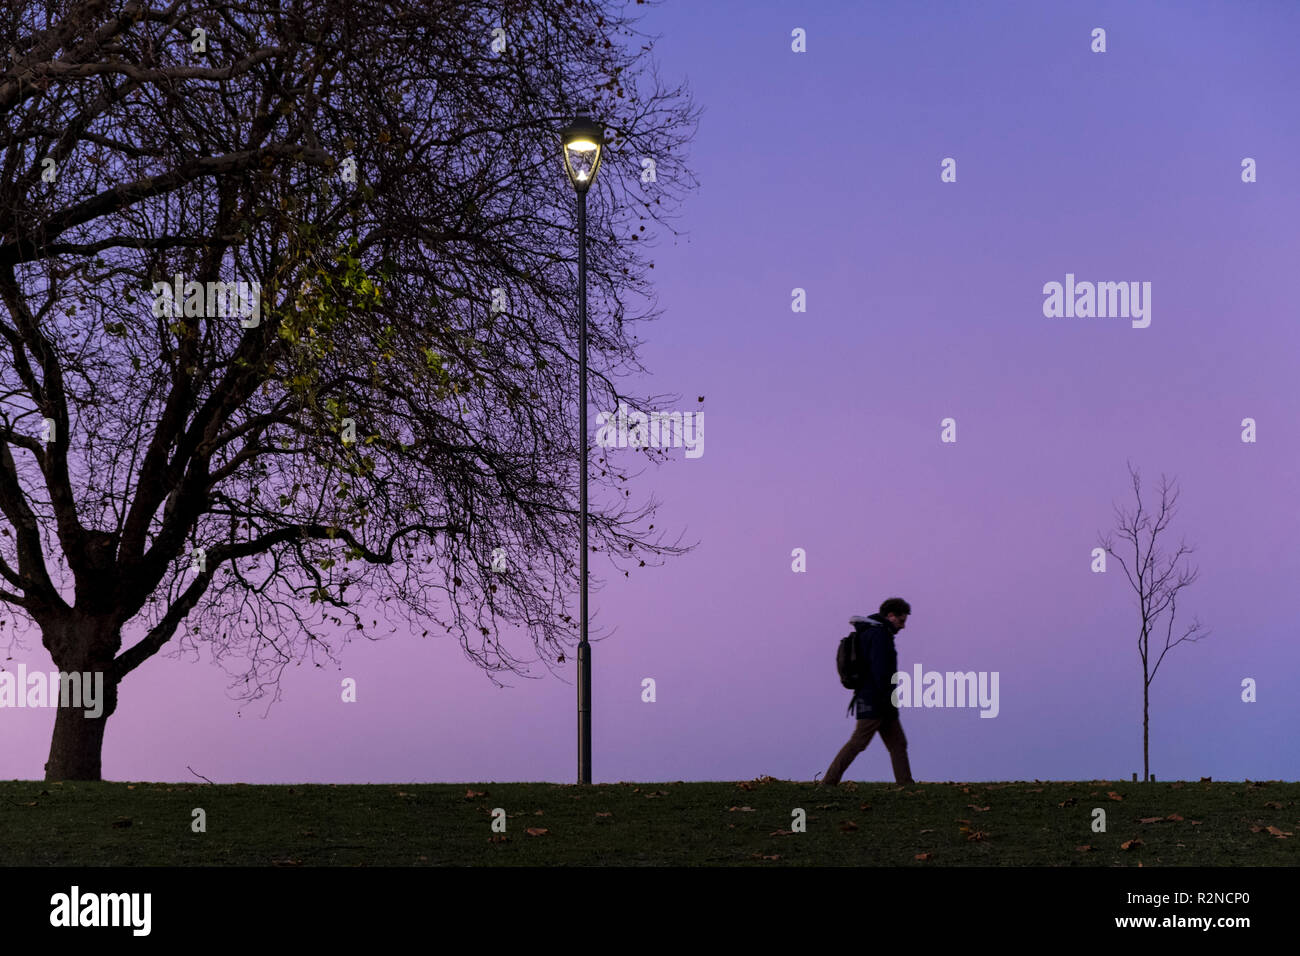 A man walking alone at night passing by trees and a street light, Nottingham, England, UK Stock Photo